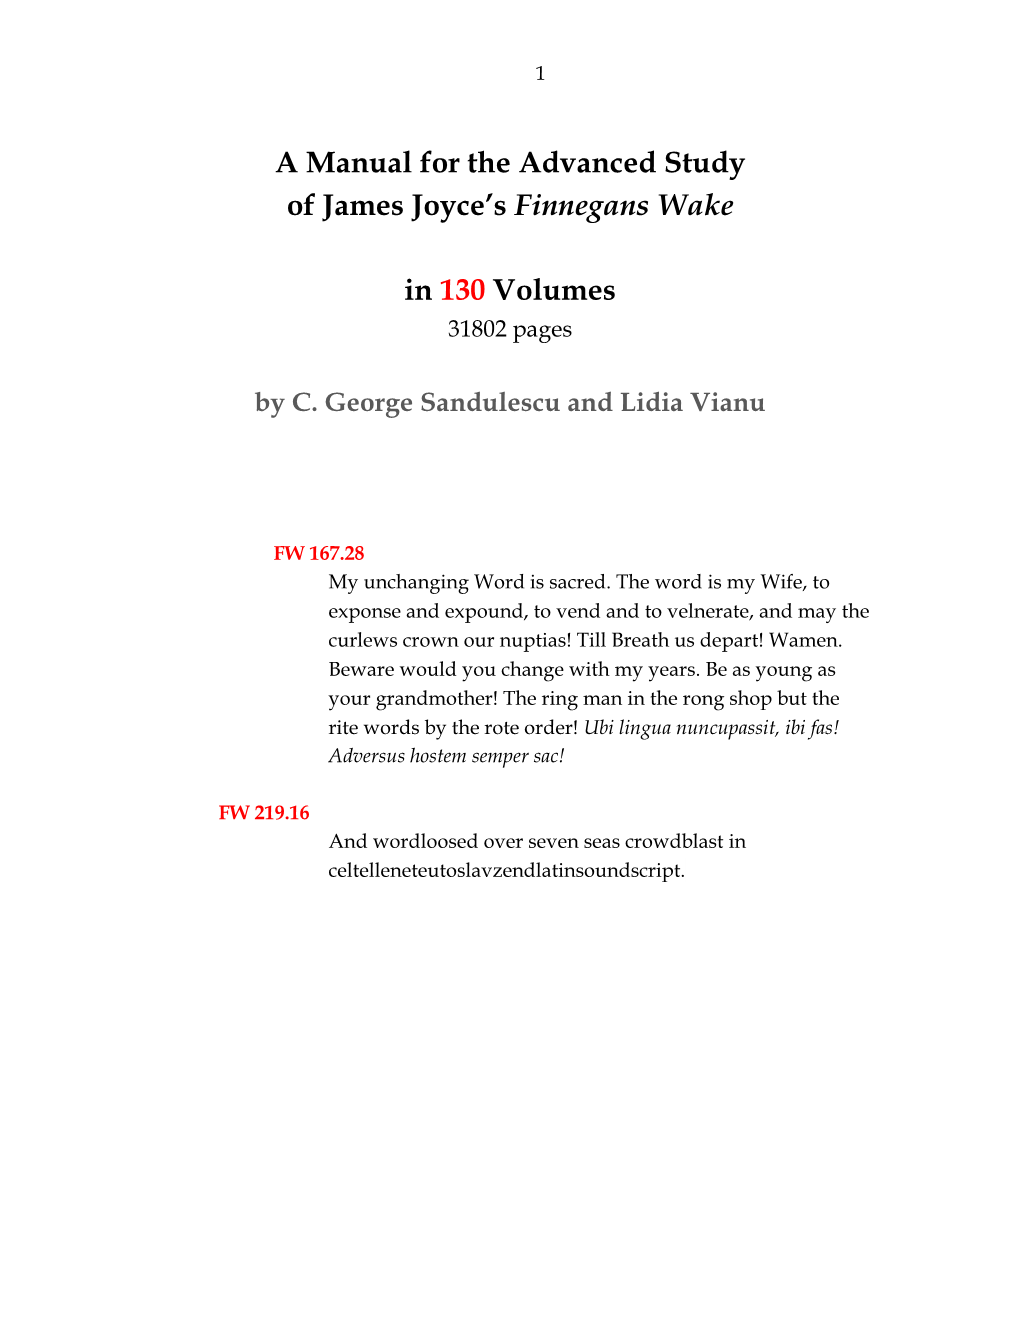 A Manual for the Advanced Study of James Joyce's Finnegans Wake in 130 Volumes